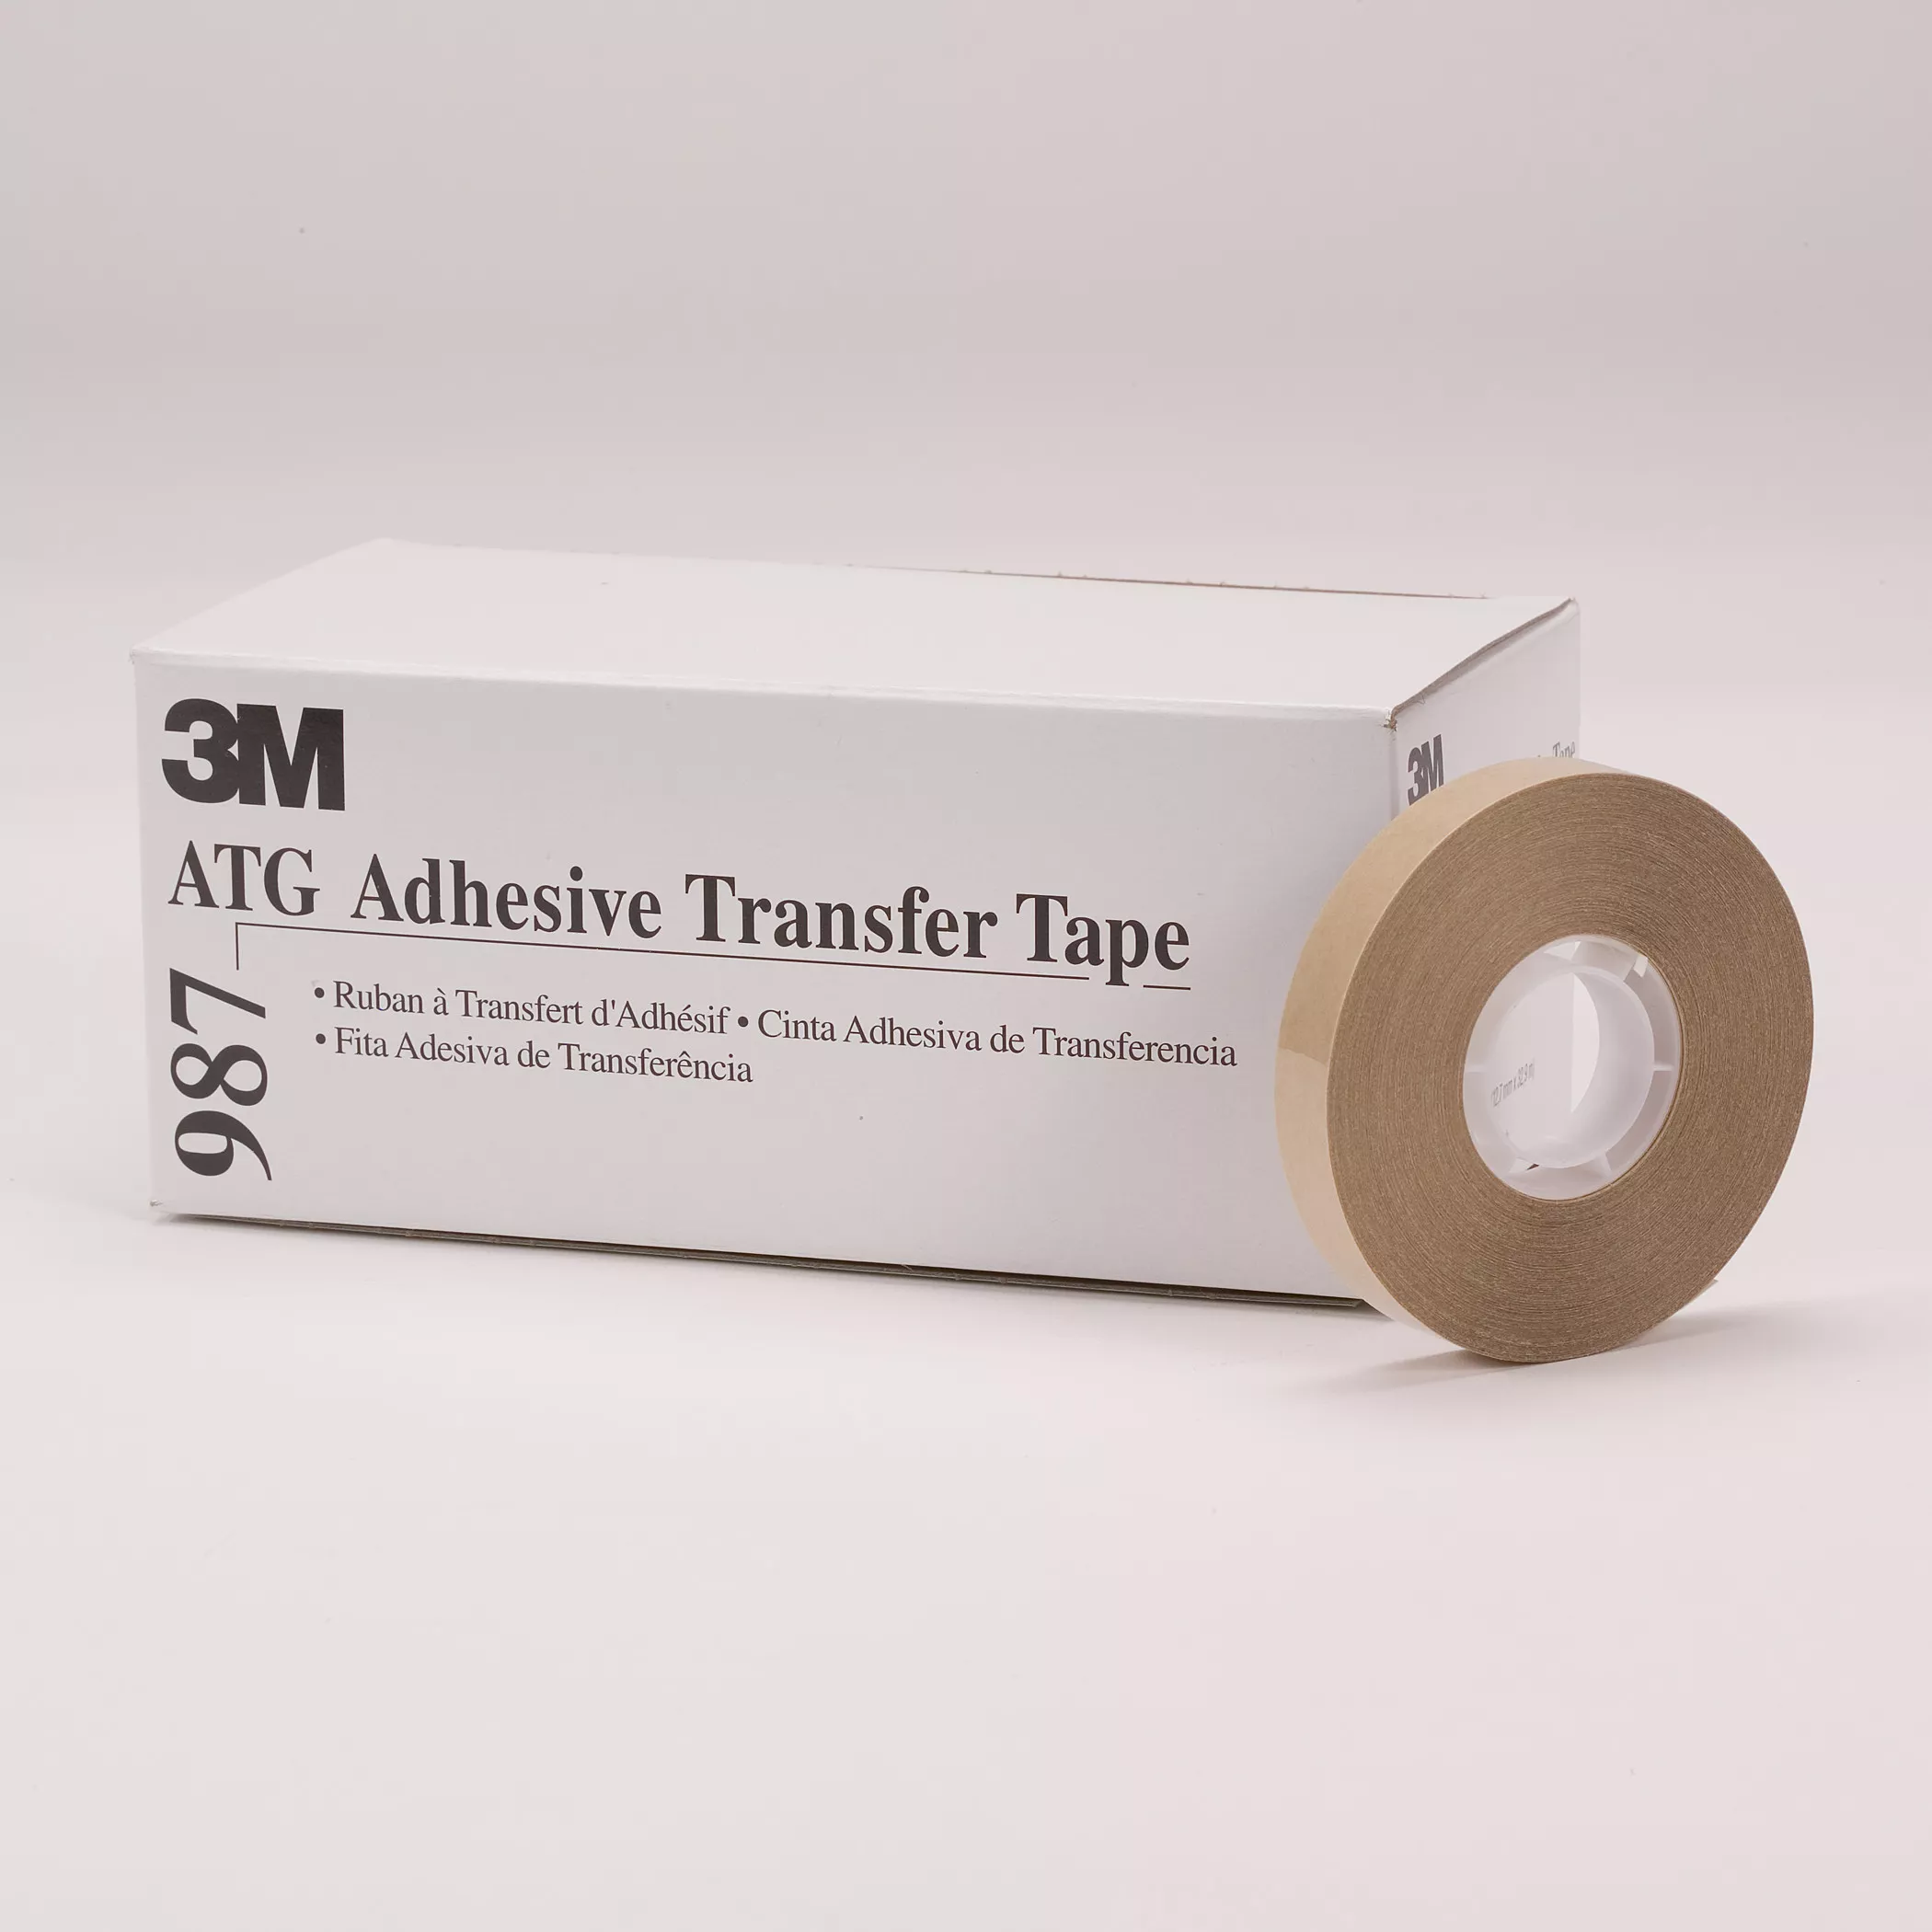 3M™ ATG Adhesive Transfer Tape 987, Clear, 1/4 in x 36 yd, 2.0 mil, 72
Roll/Case